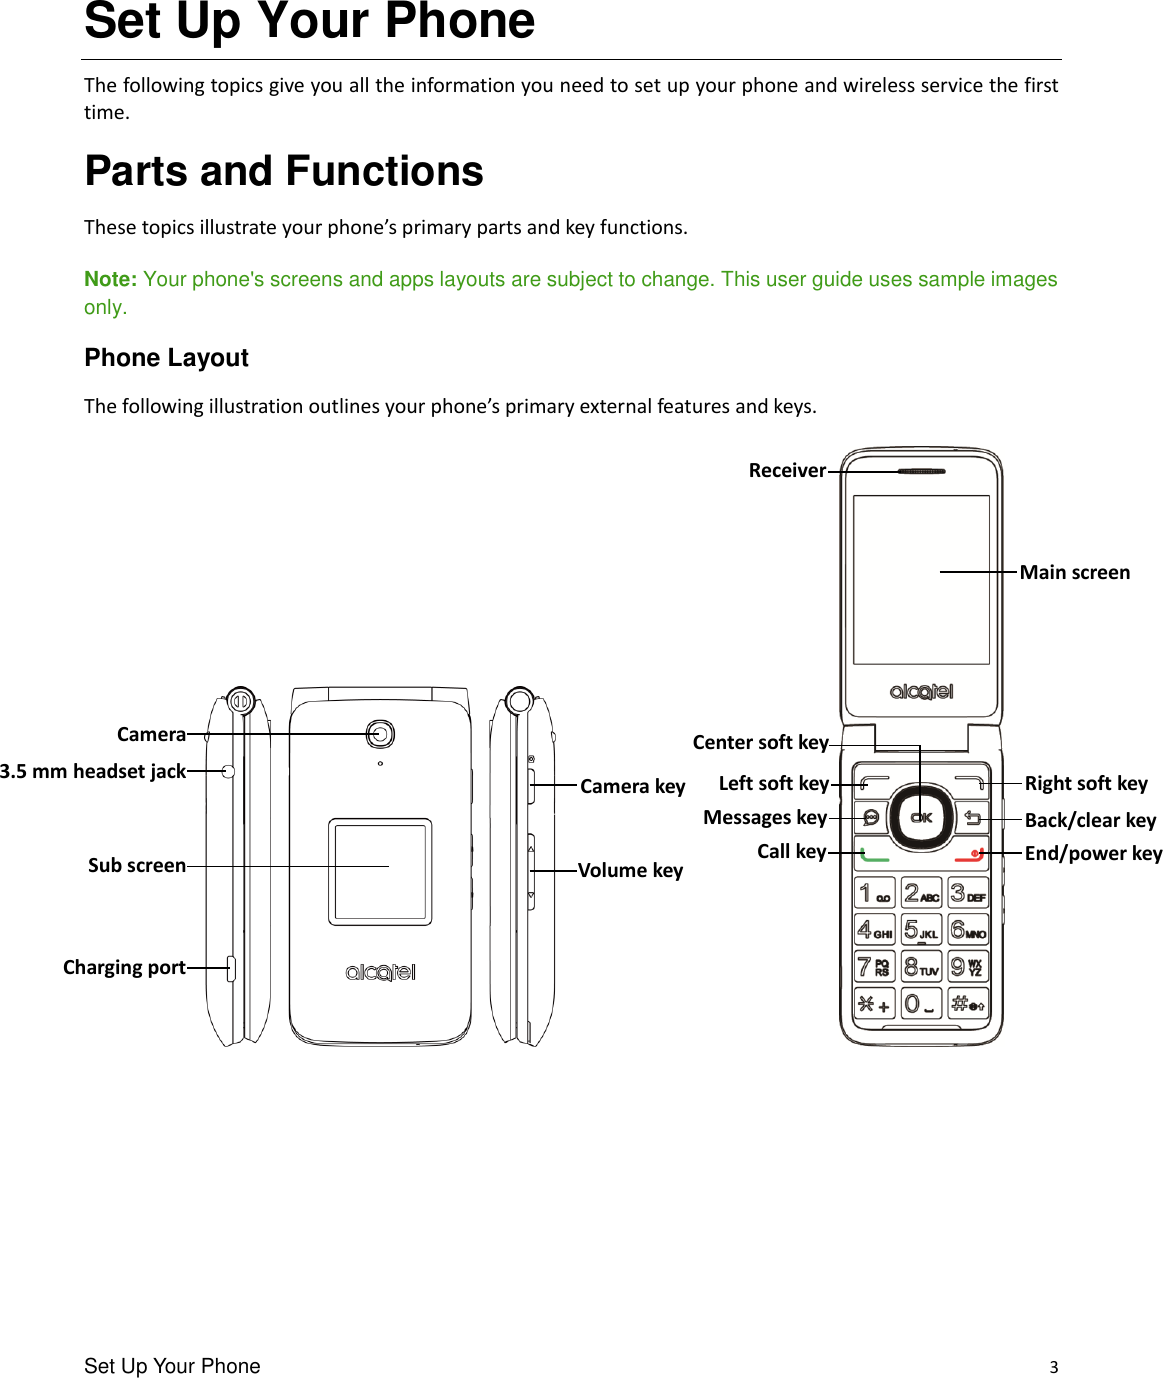 Set Up Your Phone    3 Set Up Your Phone The following topics give you all the information you need to set up your phone and wireless service the first time. Parts and Functions These topics illustrate your phone’s primary parts and key functions.  Note: Your phone&apos;s screens and apps layouts are subject to change. This user guide uses sample images only. Phone Layout   The following illustration outlines your phone’s primary external features and keys.                                                    3.5 mm headset jack Camera Charging port Camera key Volume key Sub screen Main screen Right soft key Back/clear key End/power key Left soft key Messages key Call key Center soft key Receiver 